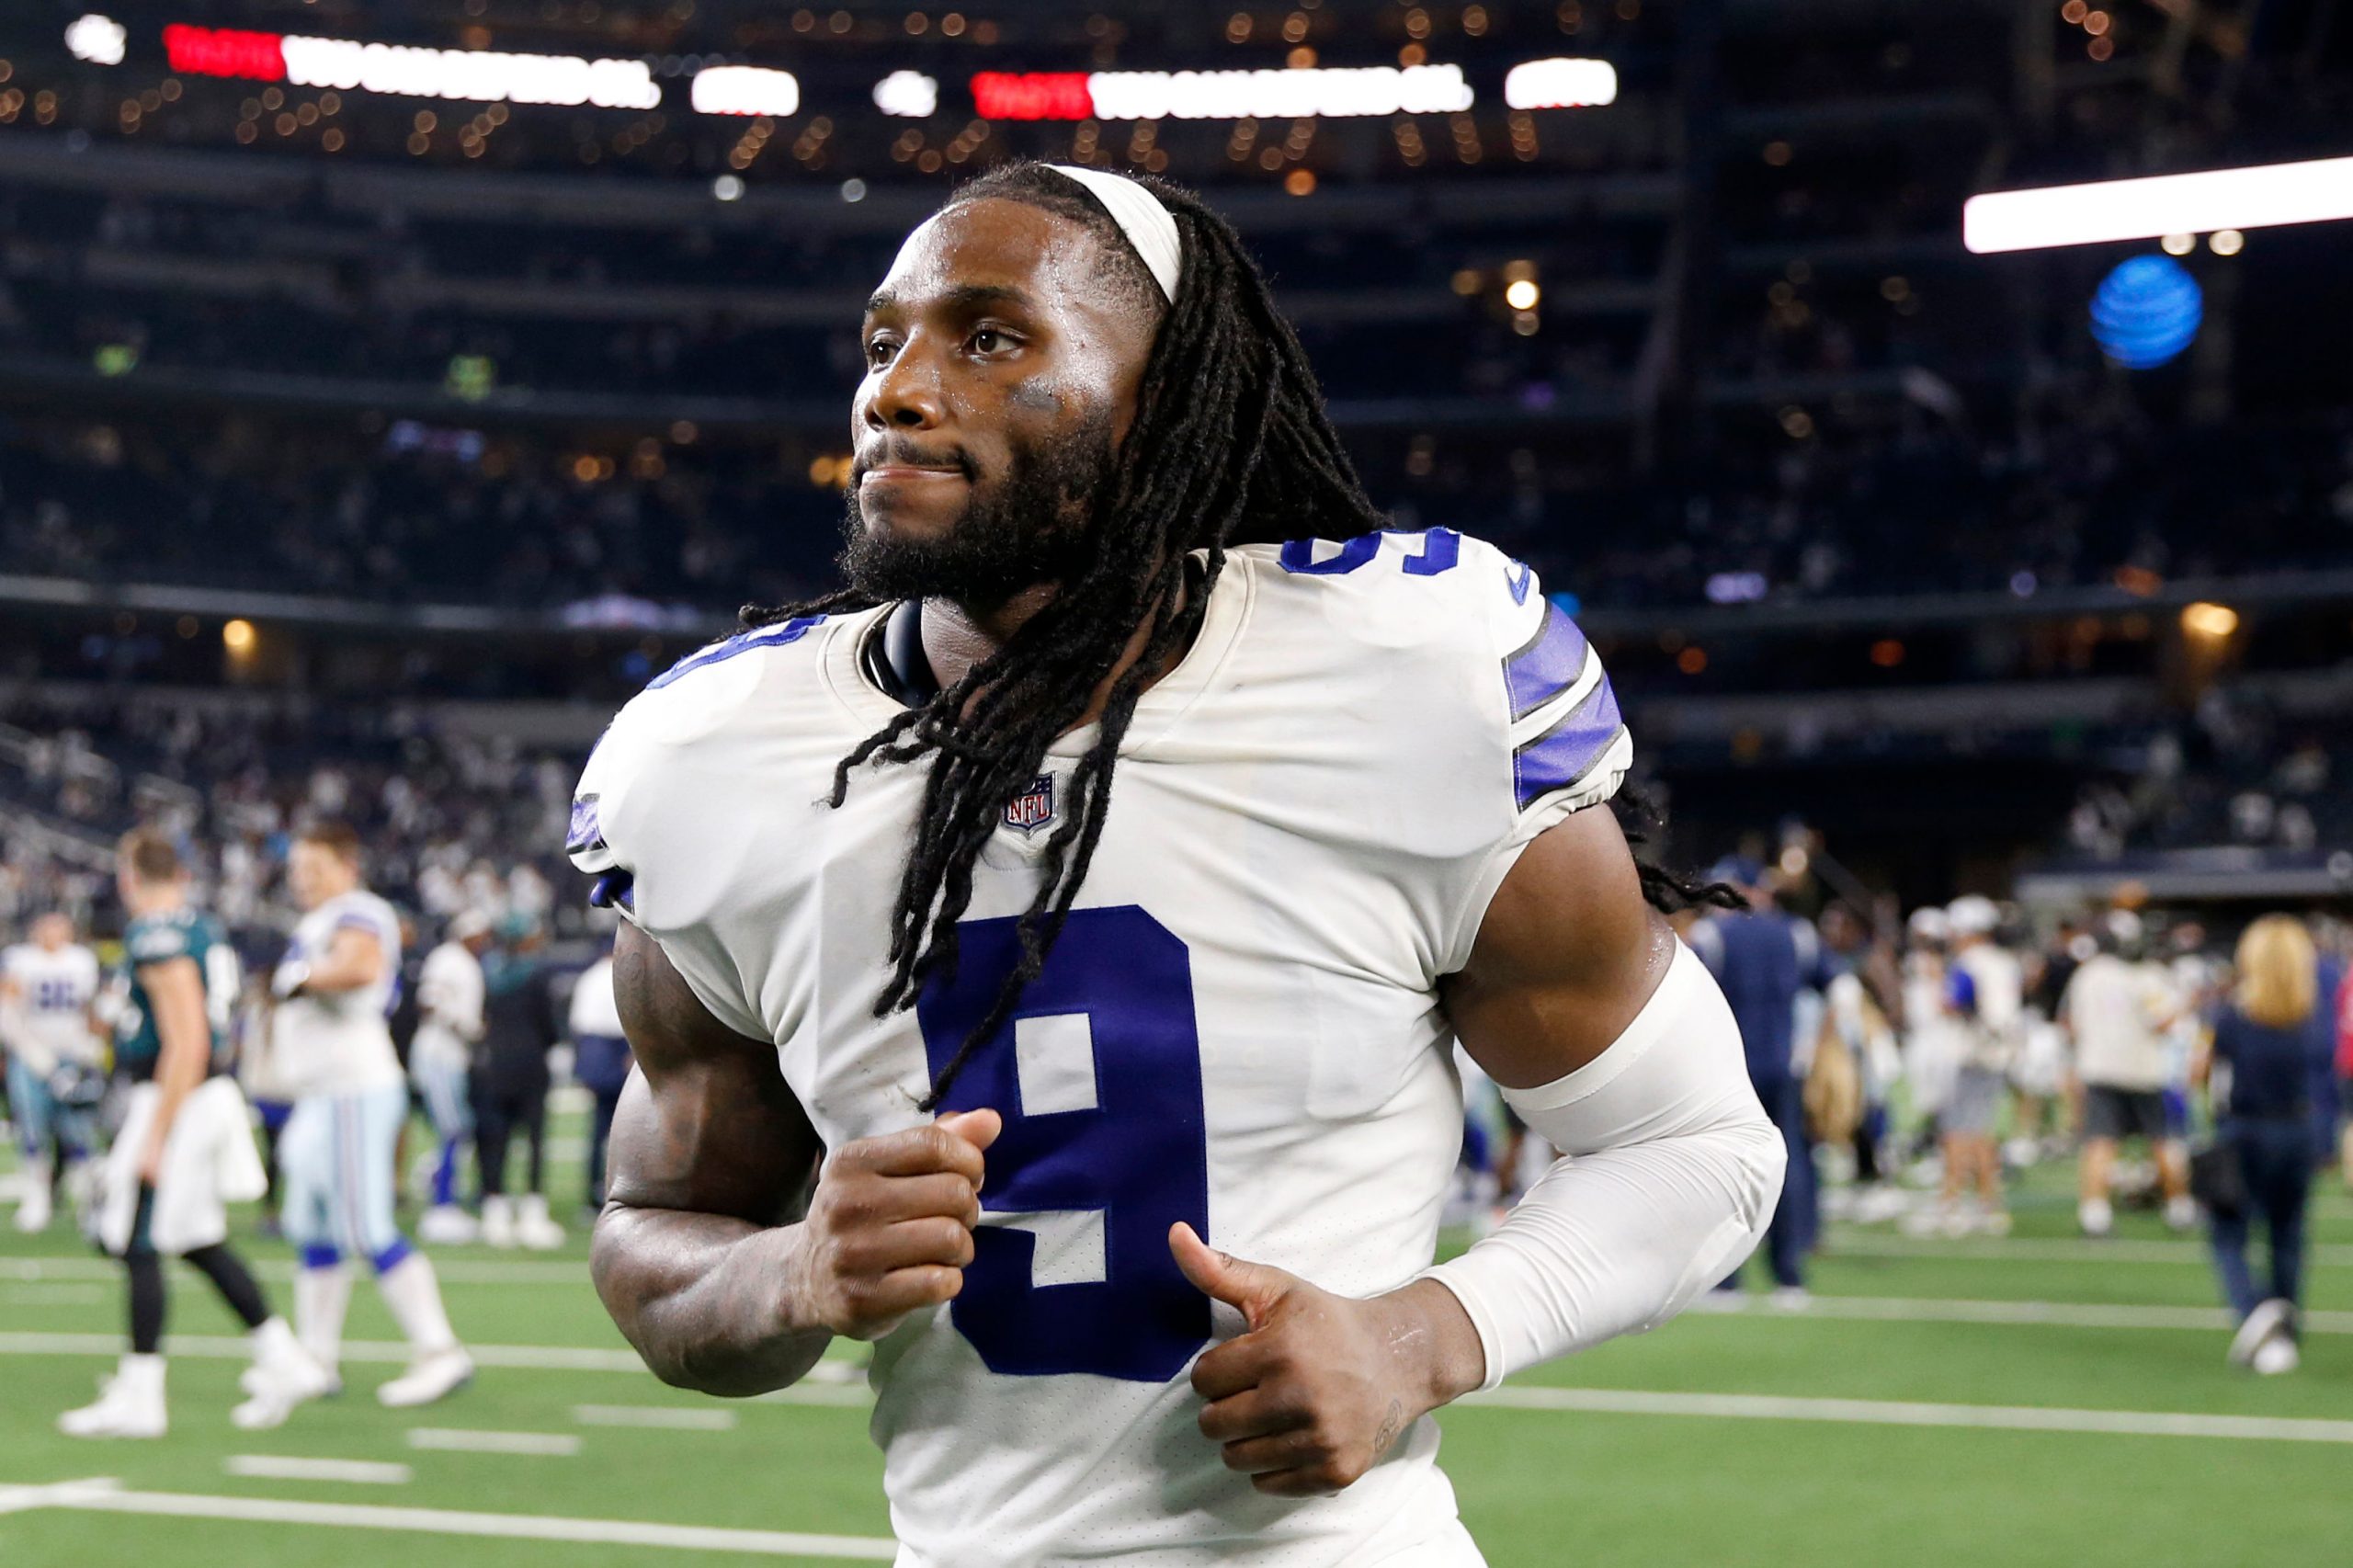 NFL: Green Bay Packers sign linebacker Jaylon Smith from Dallas Cowboys